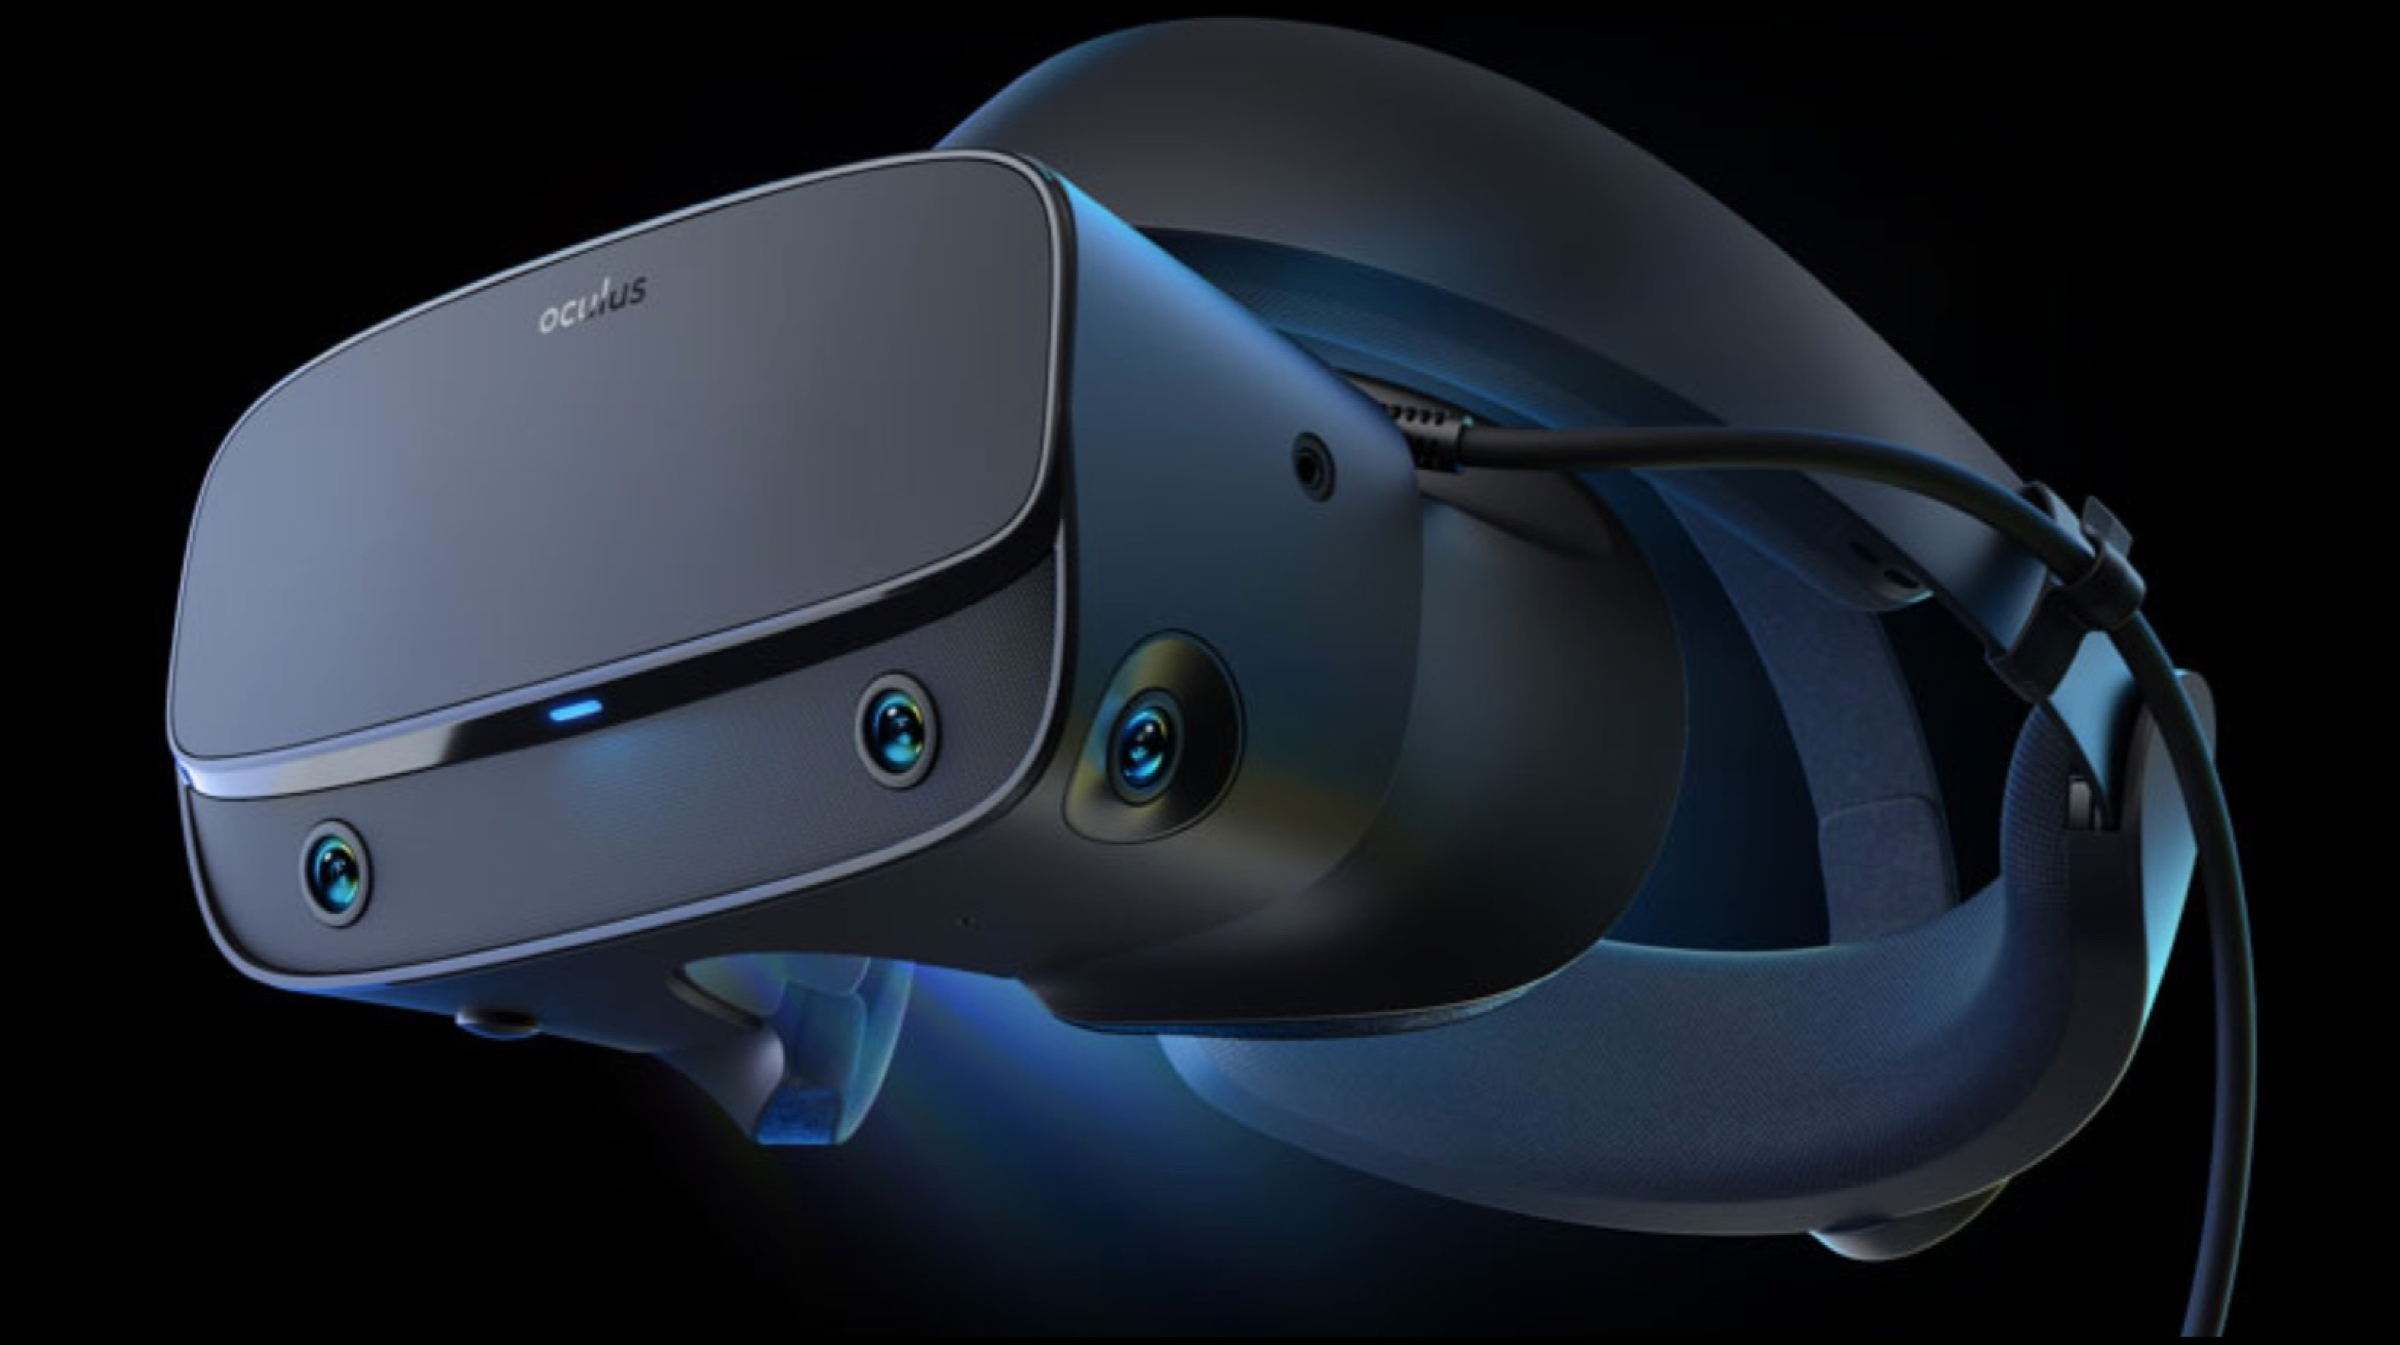 Oculus Unveils Rift S VR Headset At GDC 2019, Details | iGyaan Network